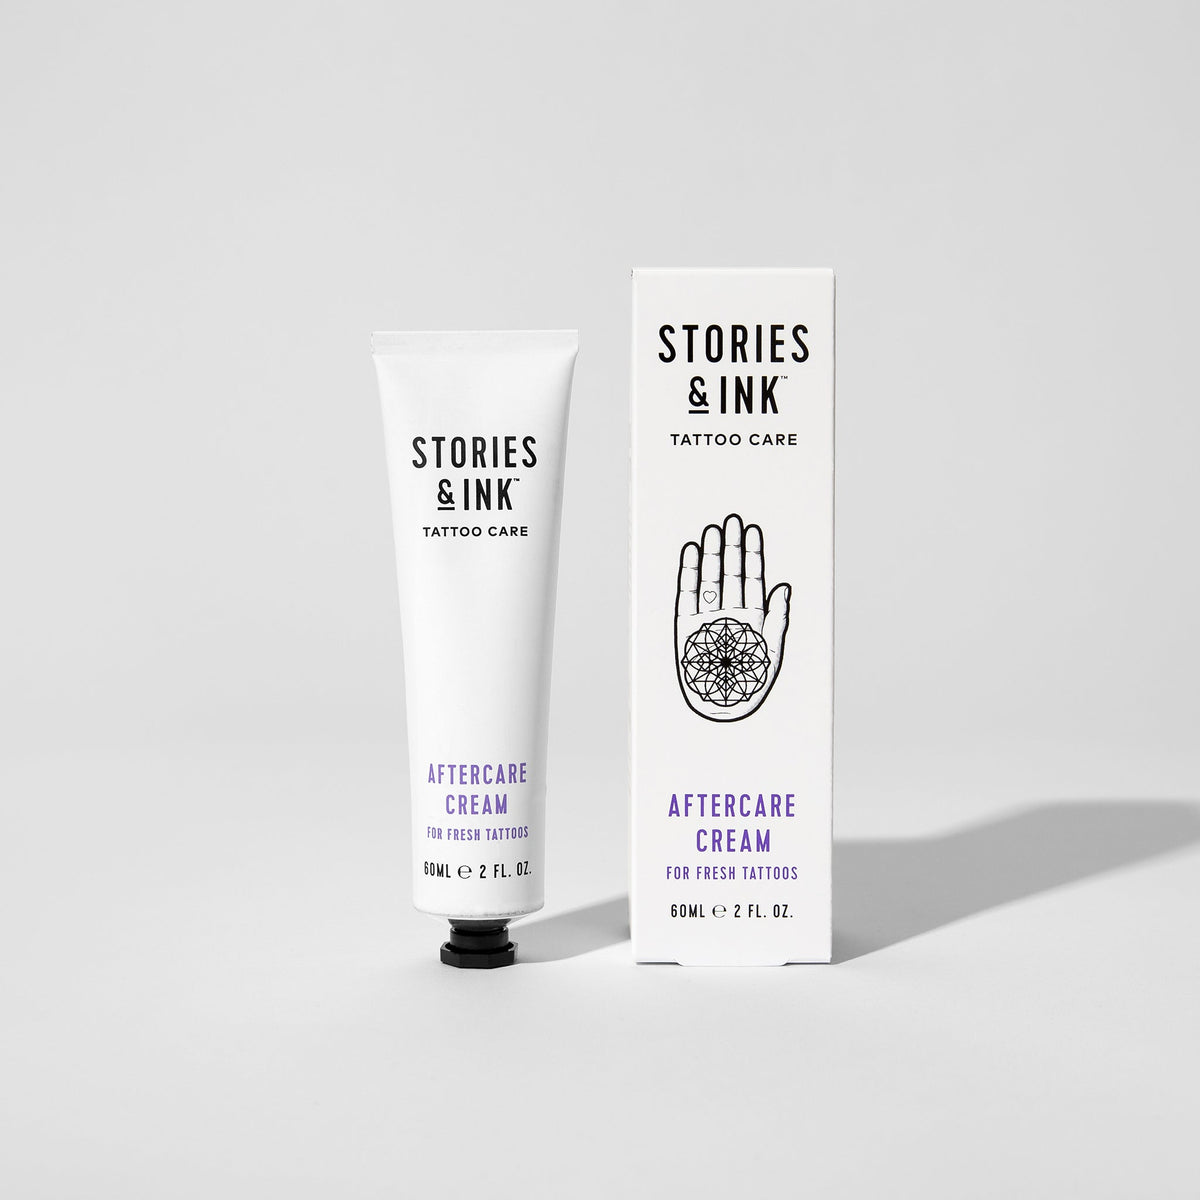 Stories & Ink Tattoo Care Aftercare Cream